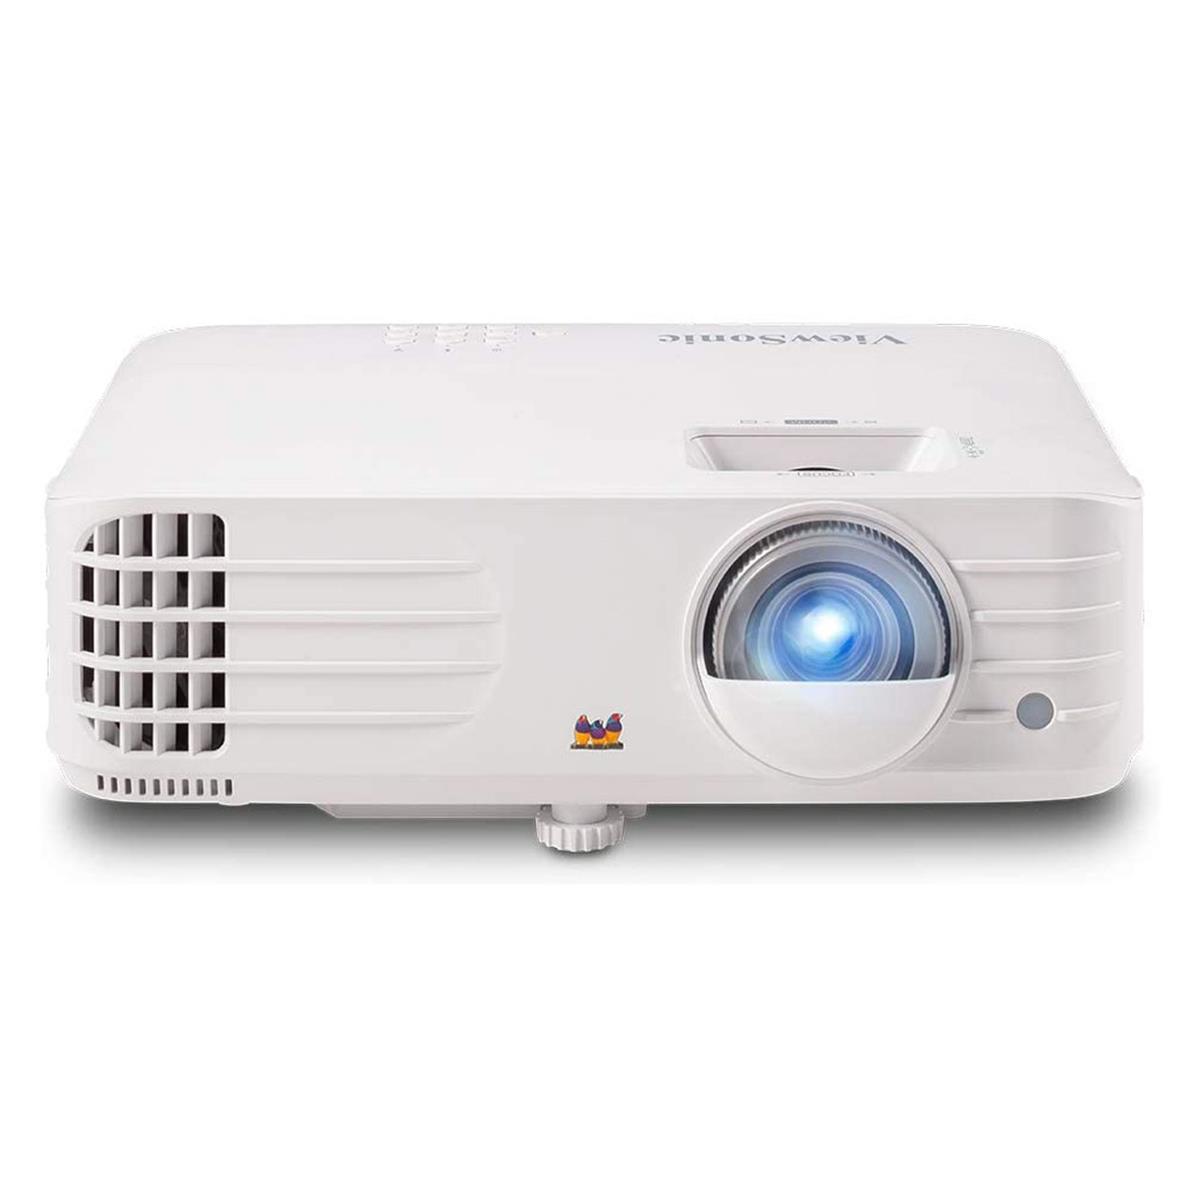 Full HD Home Theater Projector, 2000 Lumens - ViewSonic PX727HD